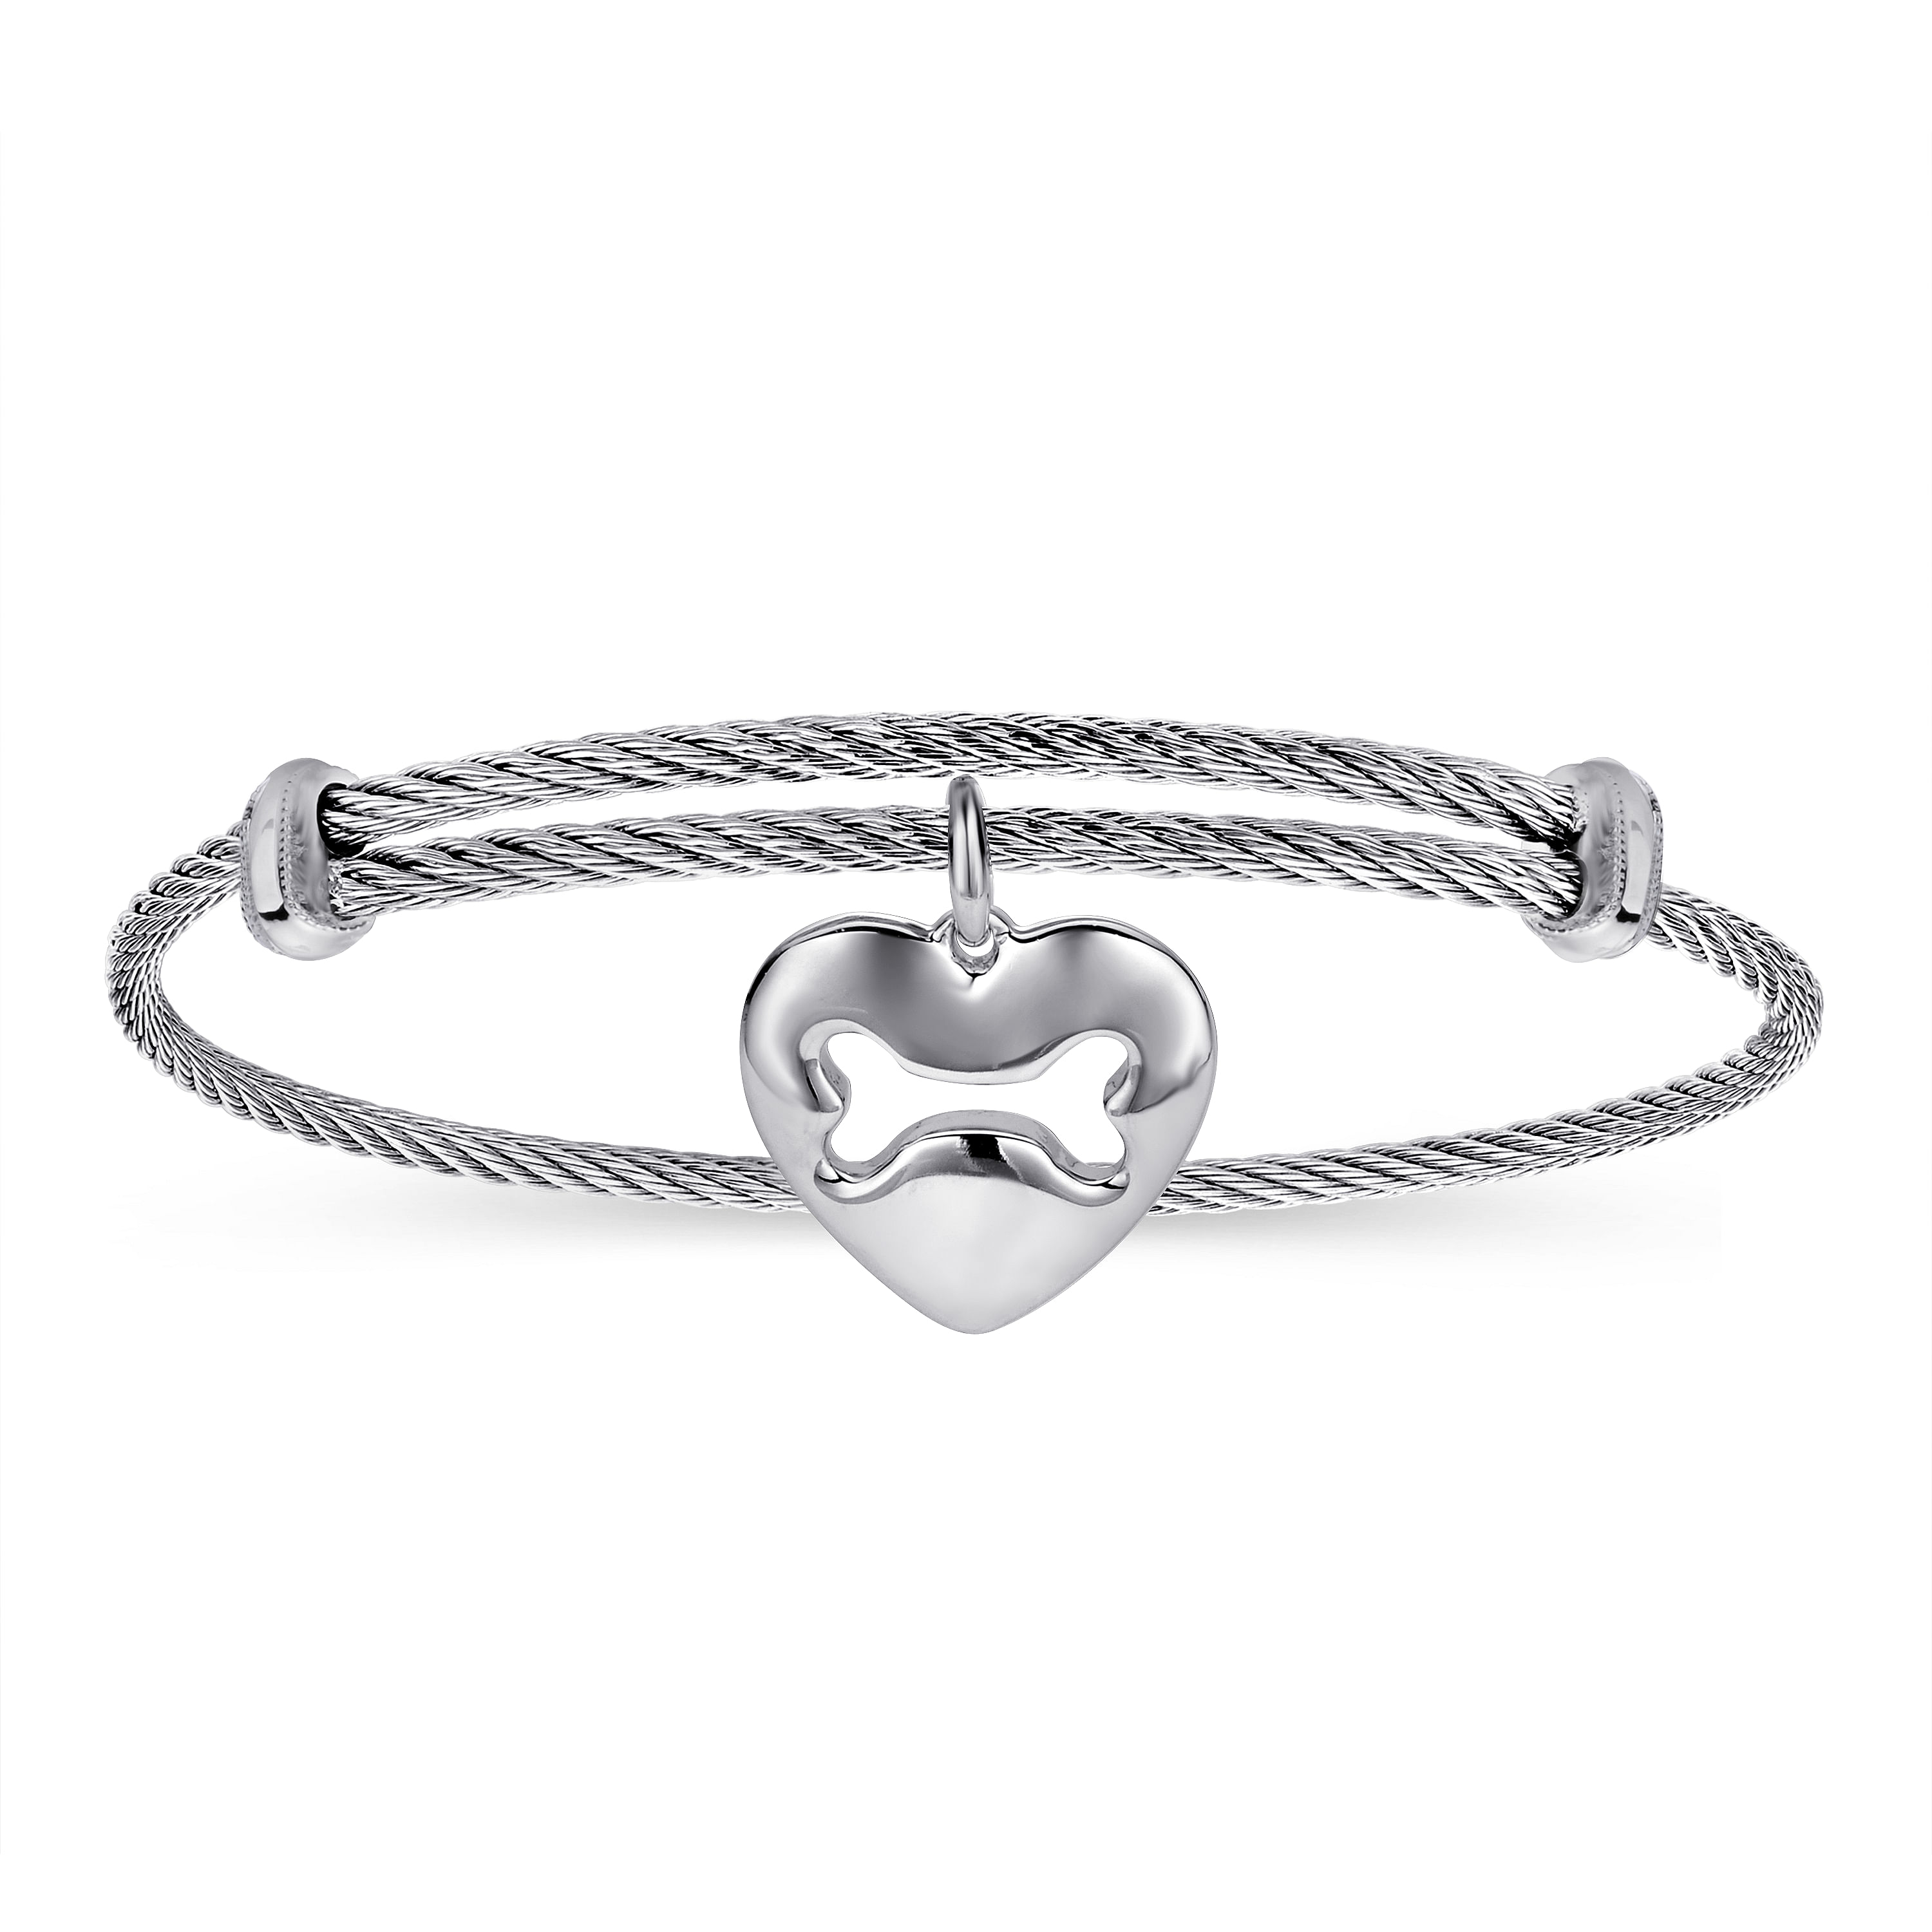 Adjustable Twisted Cable Stainless Steel Bangle with Sterling Silver Doggy Bone Charm